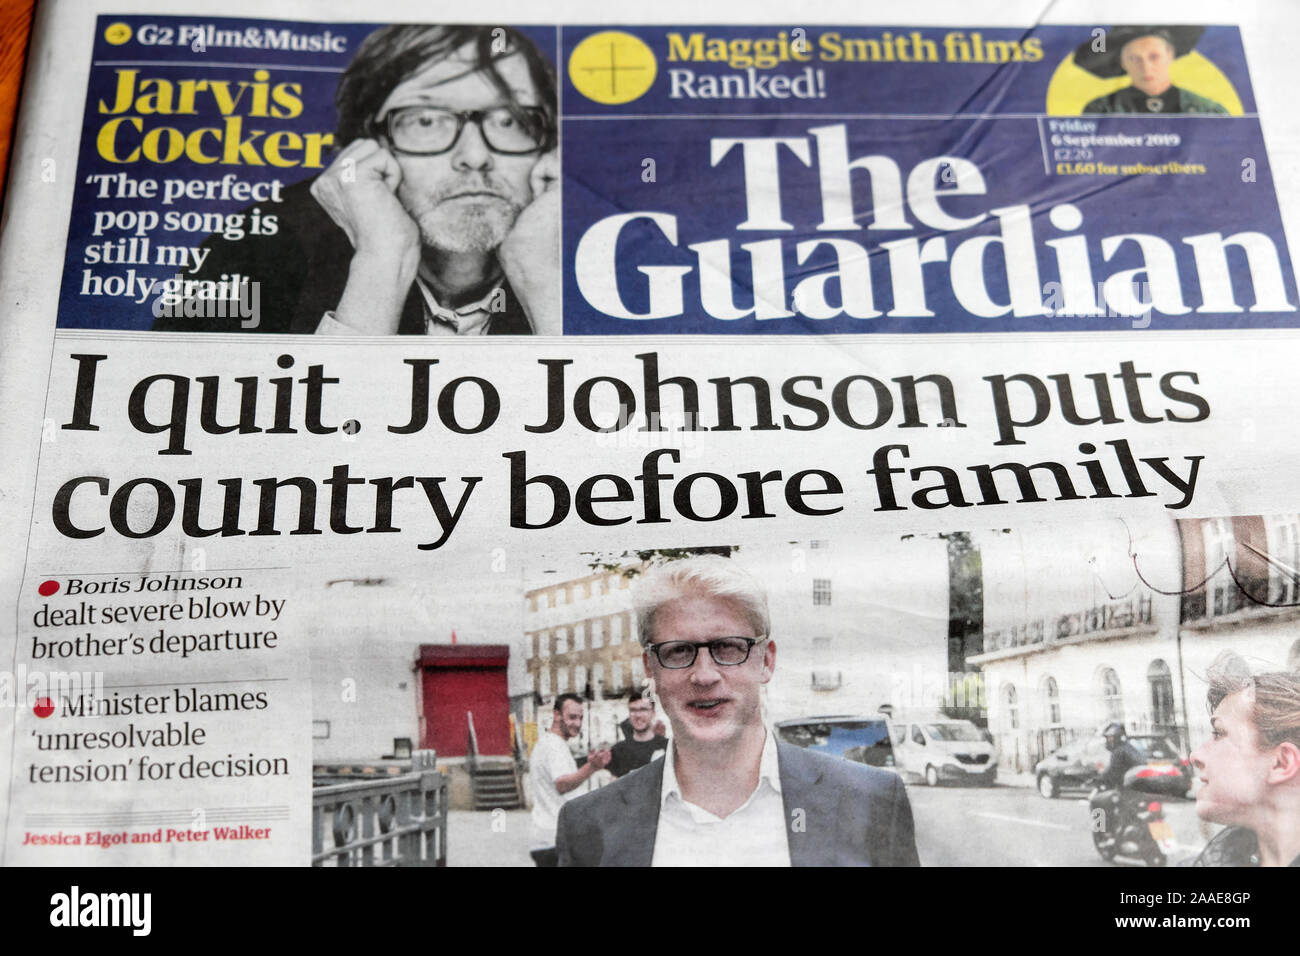 'I quit. Jo Johnson puts country before family' newspaper headline in The Guardian newspaper on 6 September 2019  in London, England UK Stock Photo